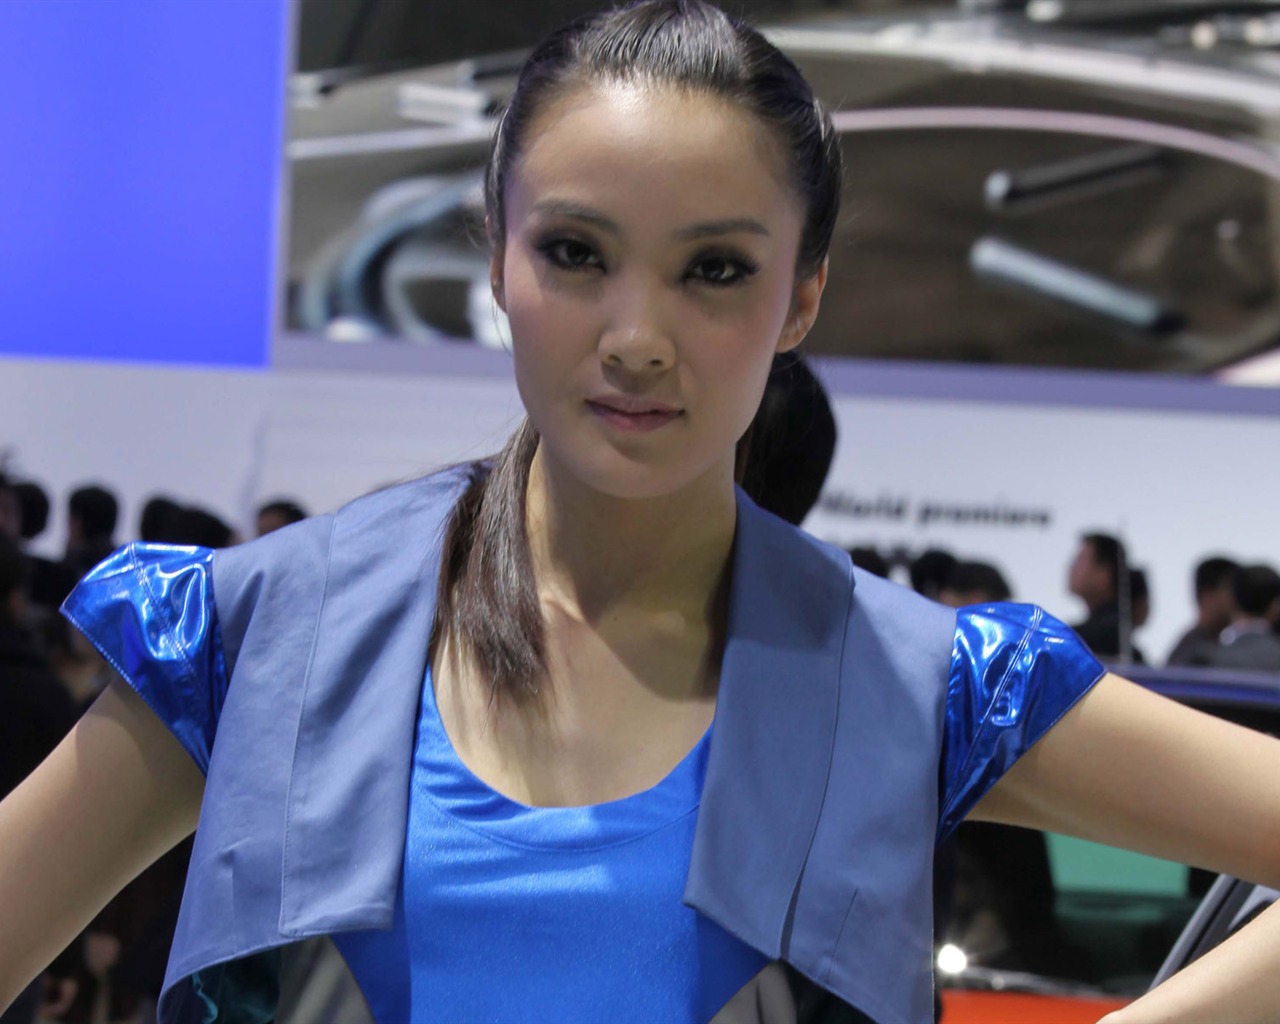 2010 Beijing International Auto Show beauty (2) (the wind chasing the clouds works) #8 - 1280x1024